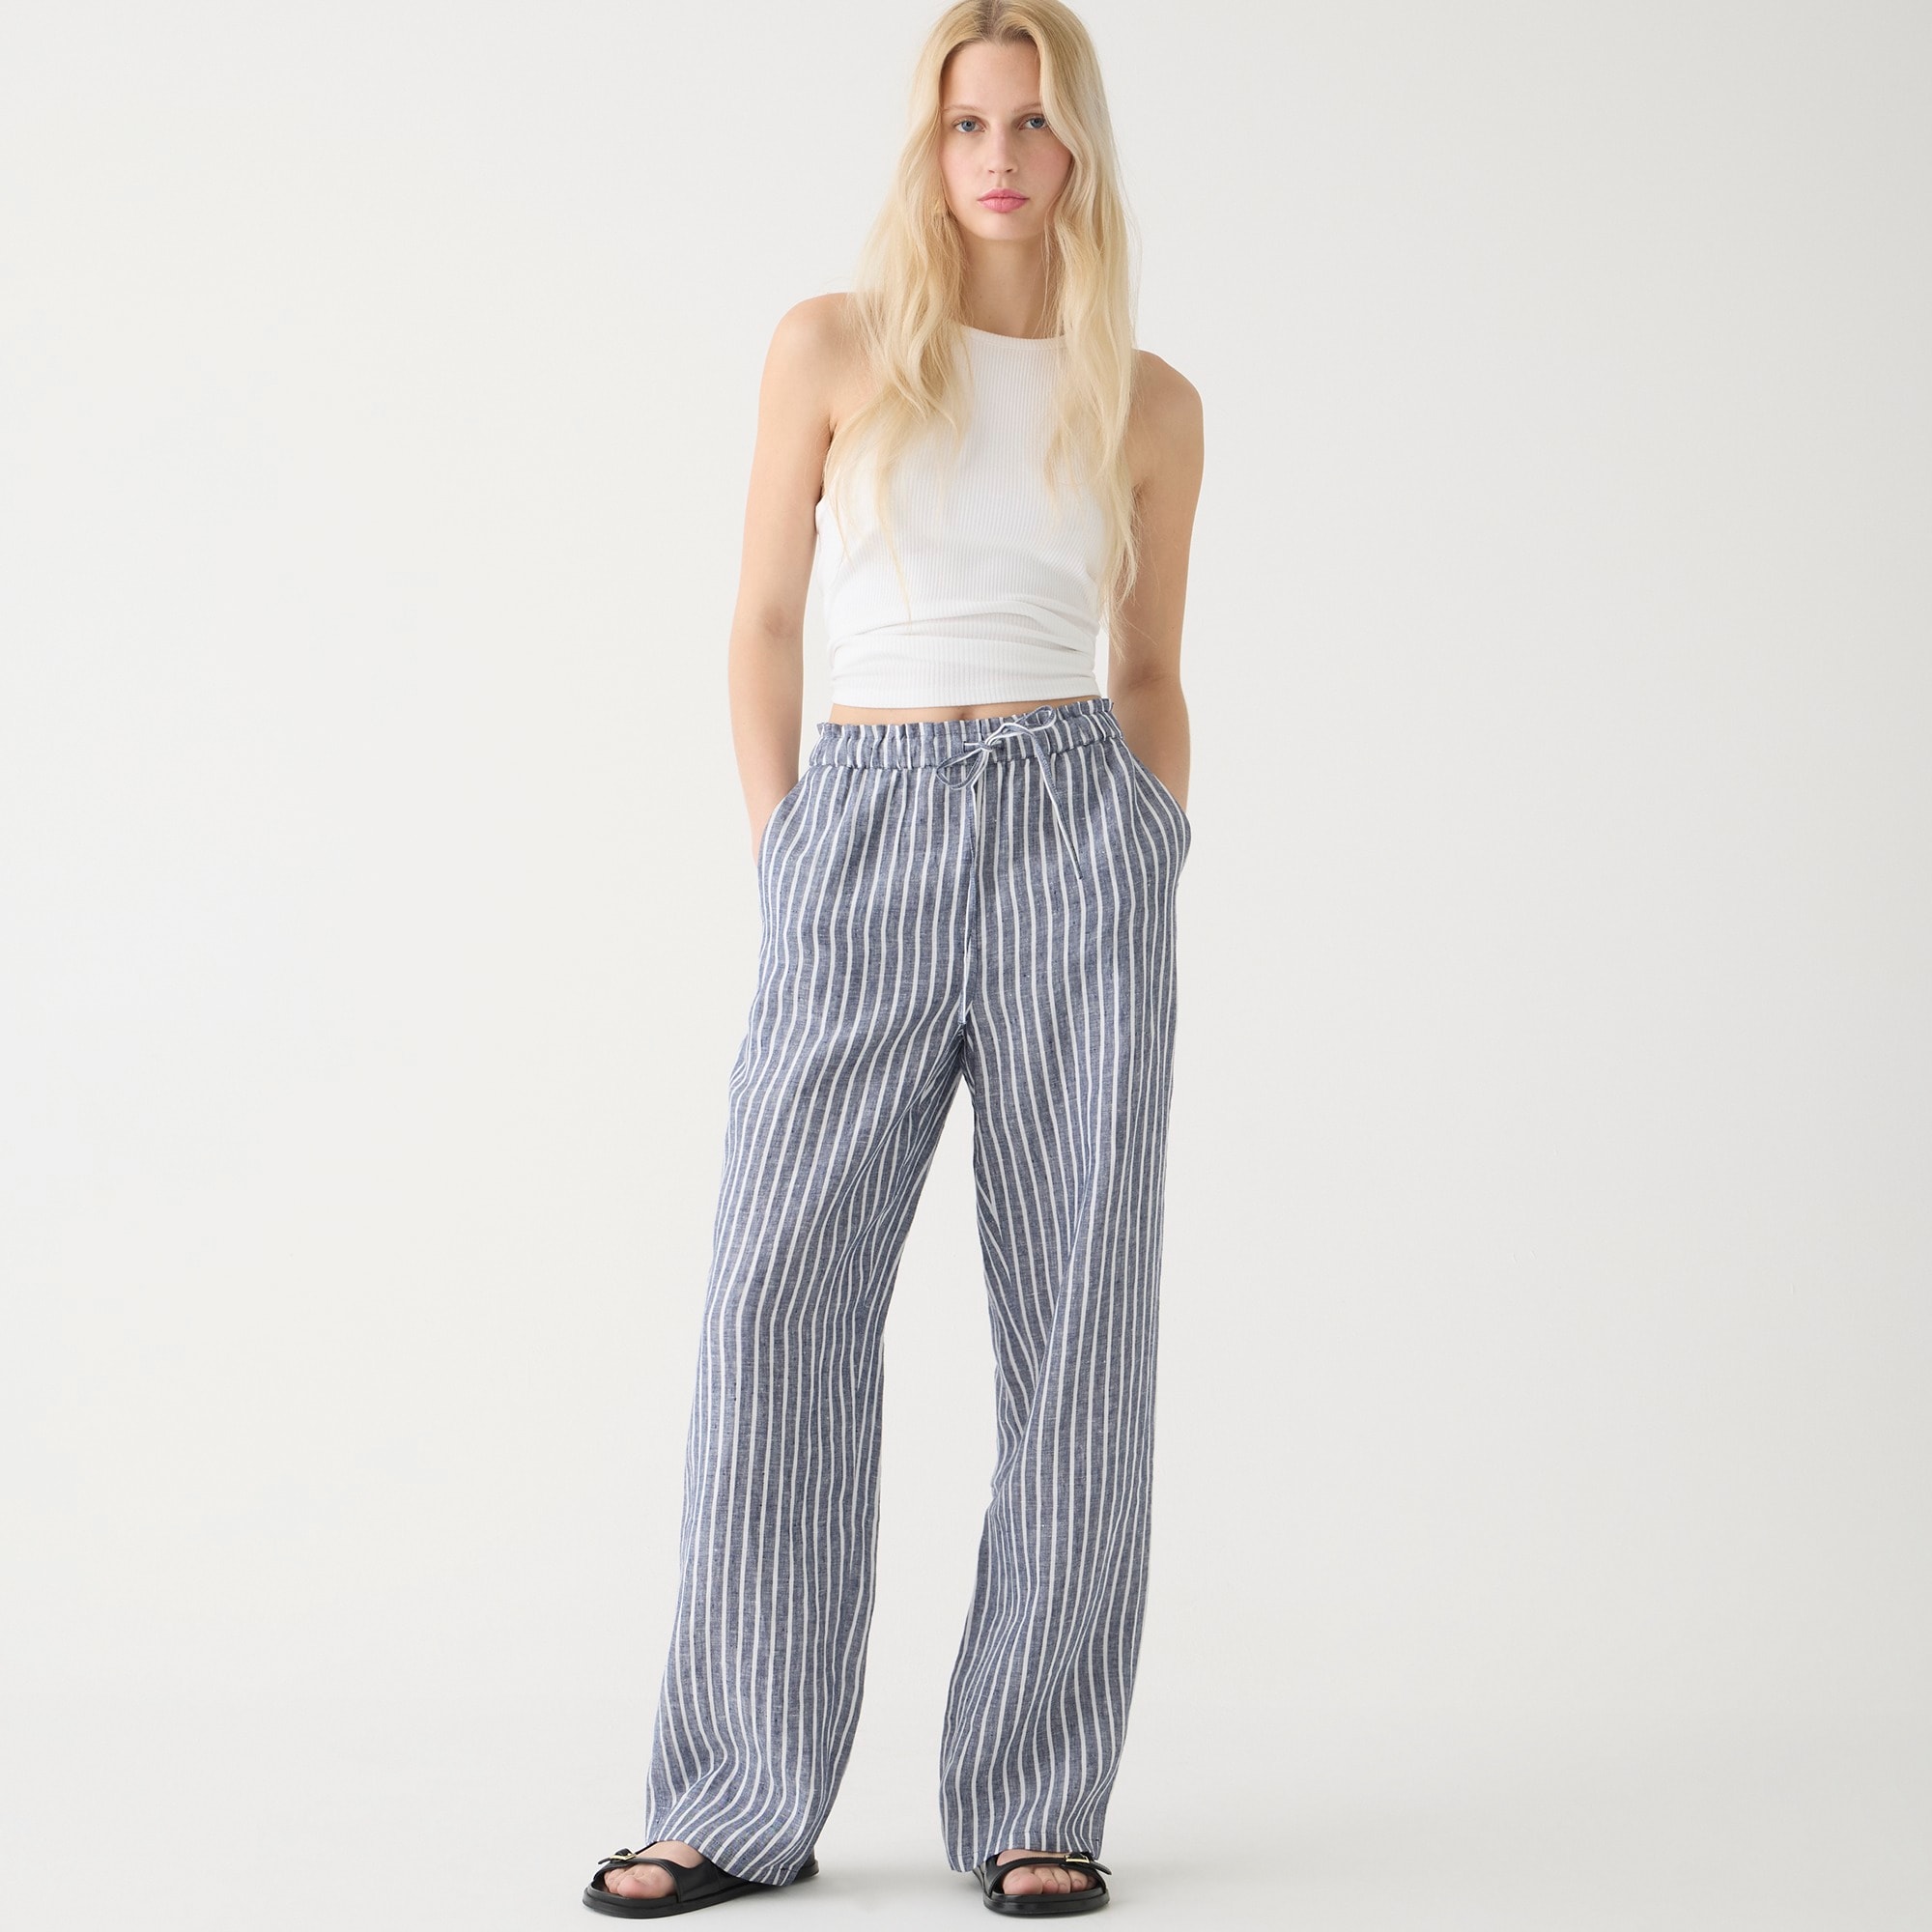  Petite soleil pant in striped linen